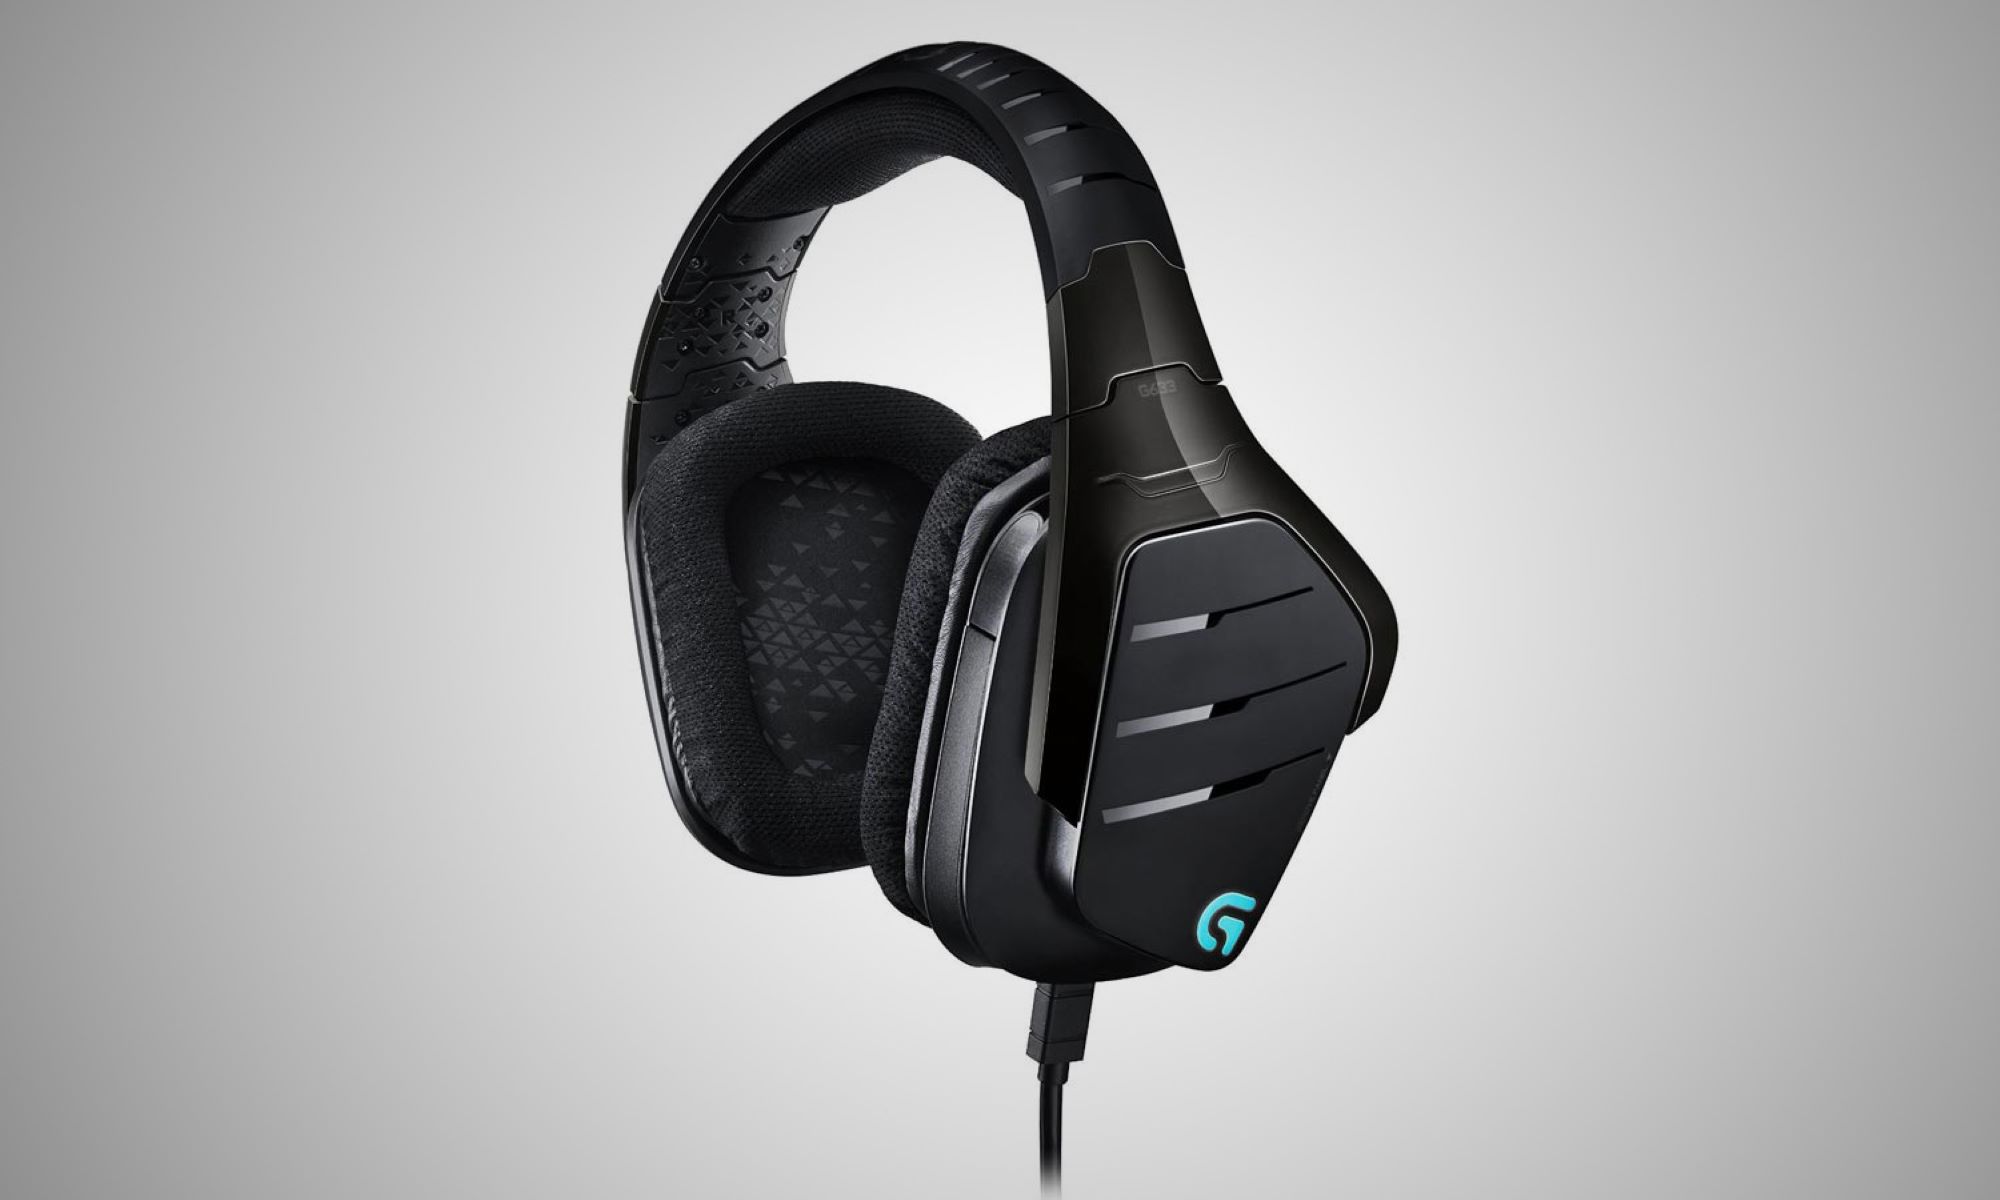 How To Connect Logitech G633 Artemis Spectrum RGB 7.1 Surround Sound Gaming Headset To PS4